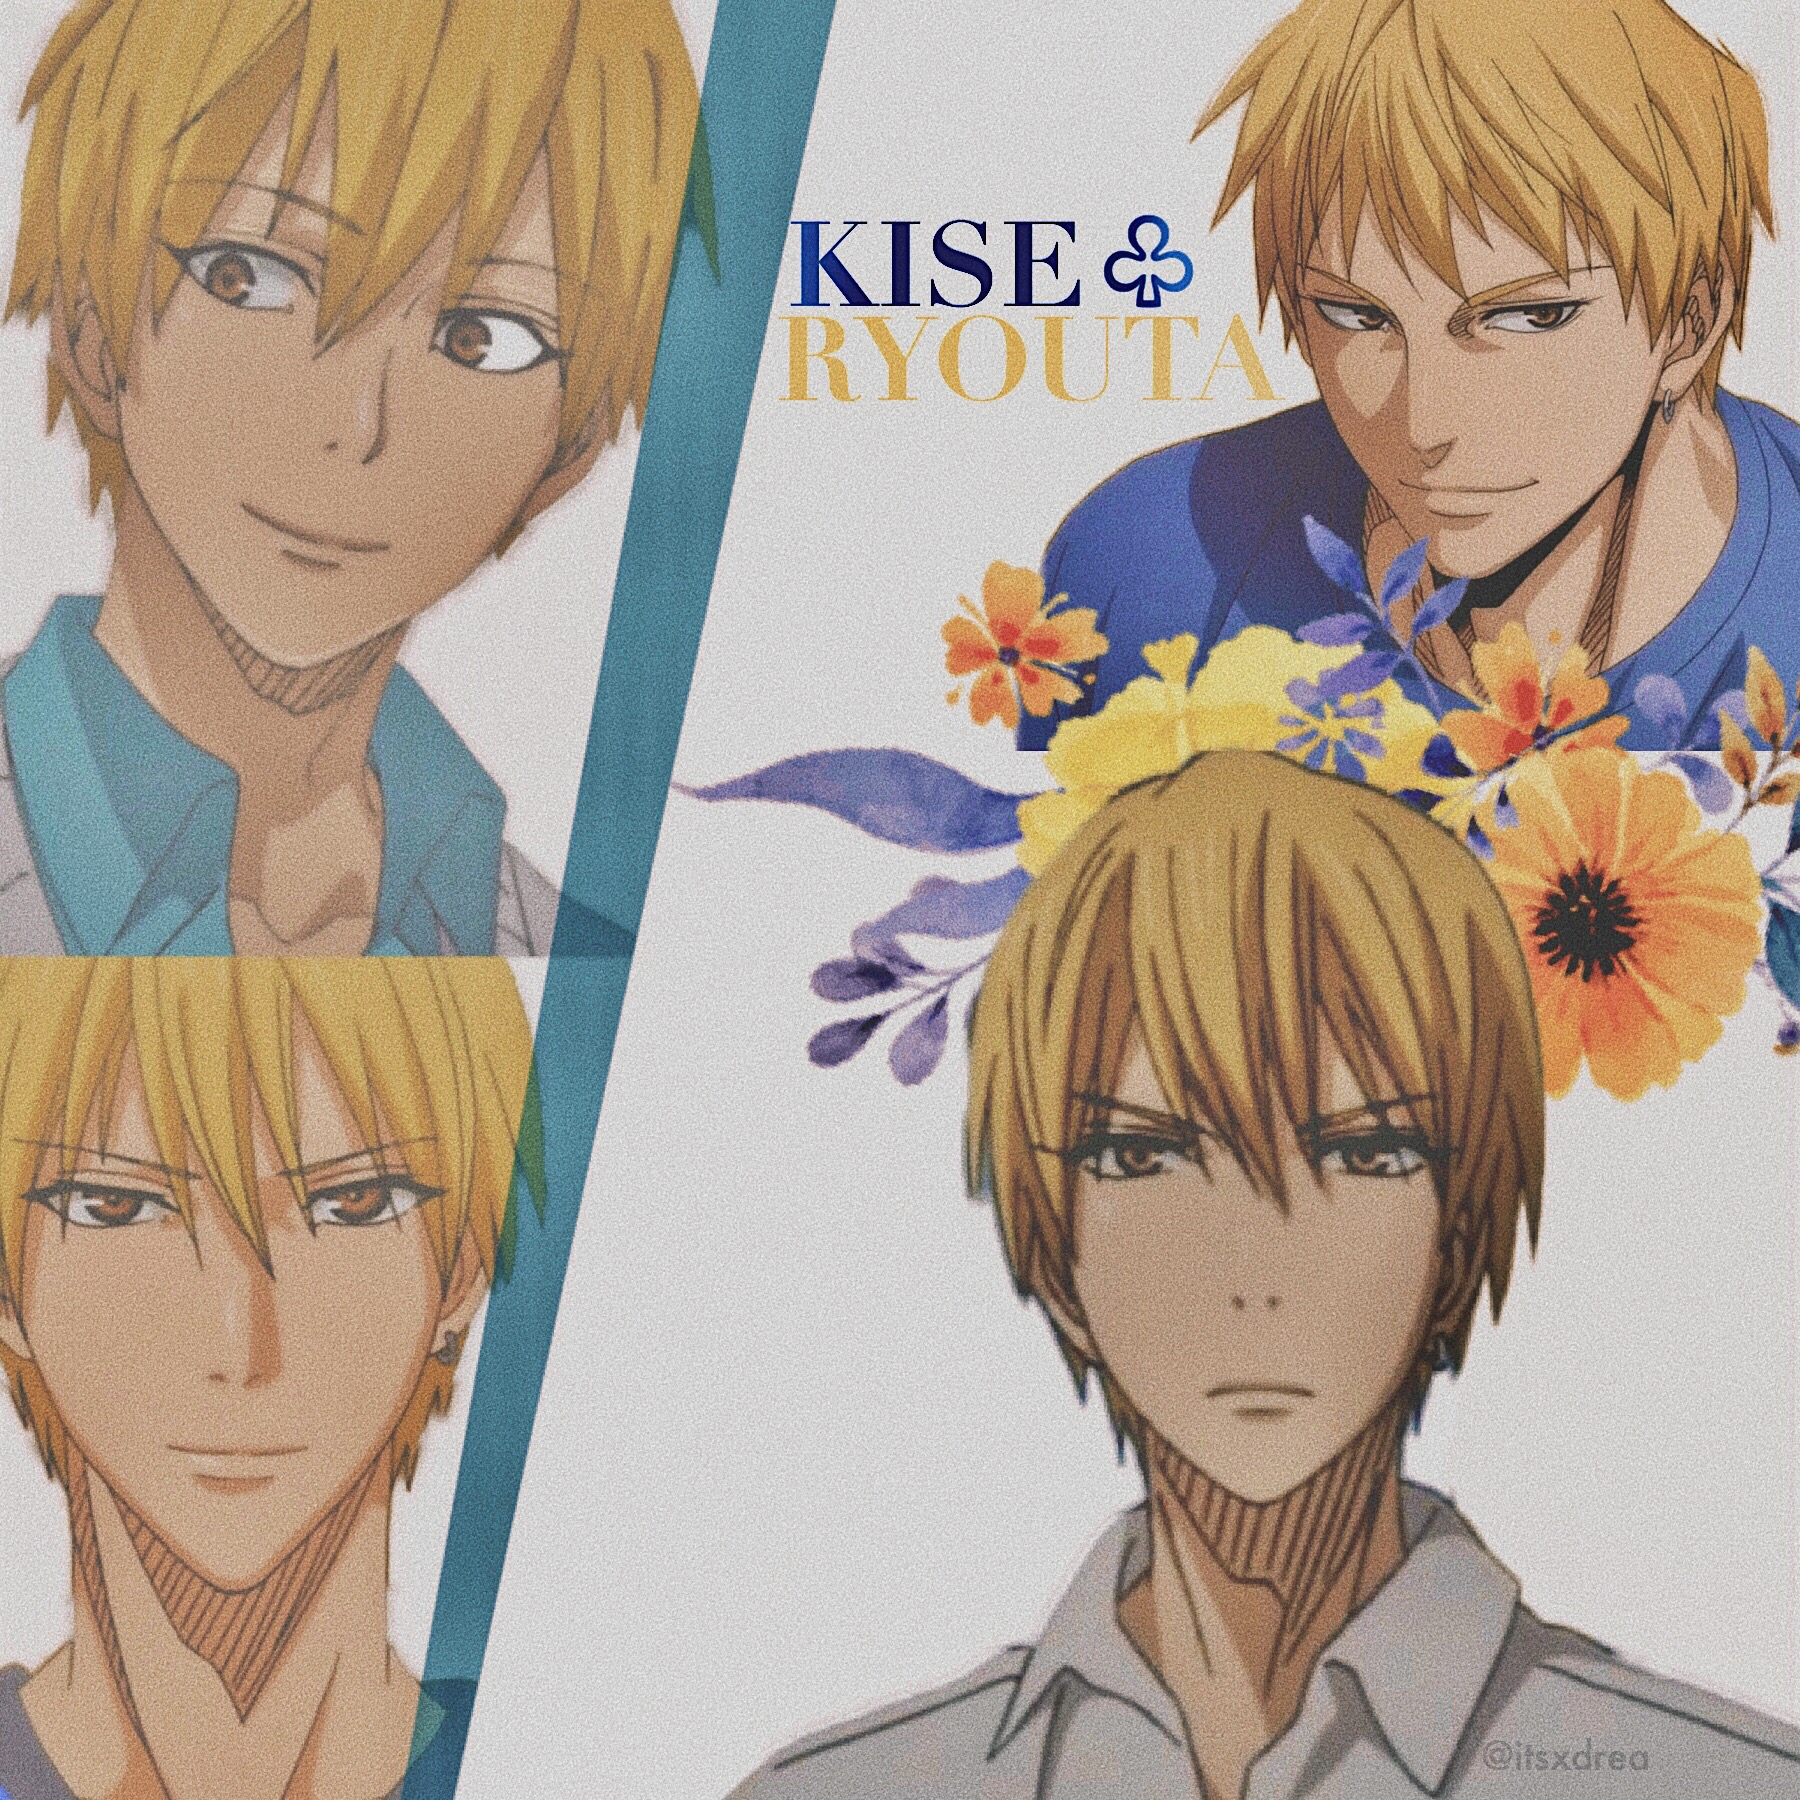 🌠
• kise ryouta // kuroko no basuke •
> edit request for @Whoop_Whoop127 <
here you go queen, i hope you like it😌 PSA sorry for starting edits late, i had things to do for family last week. but it’s all good i’m alive ✨